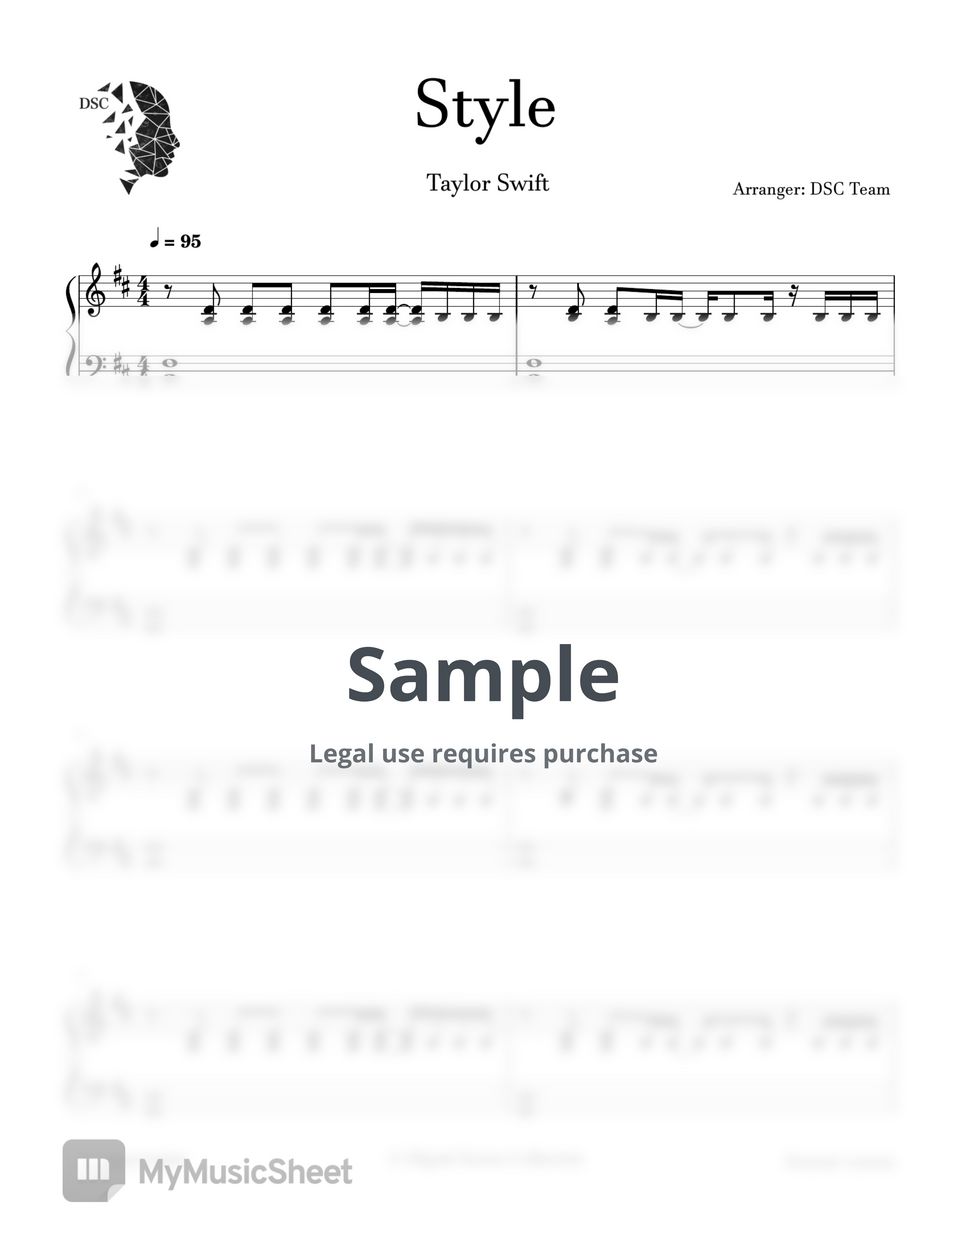 Taylor Swift - Style by Digital Scores Collection